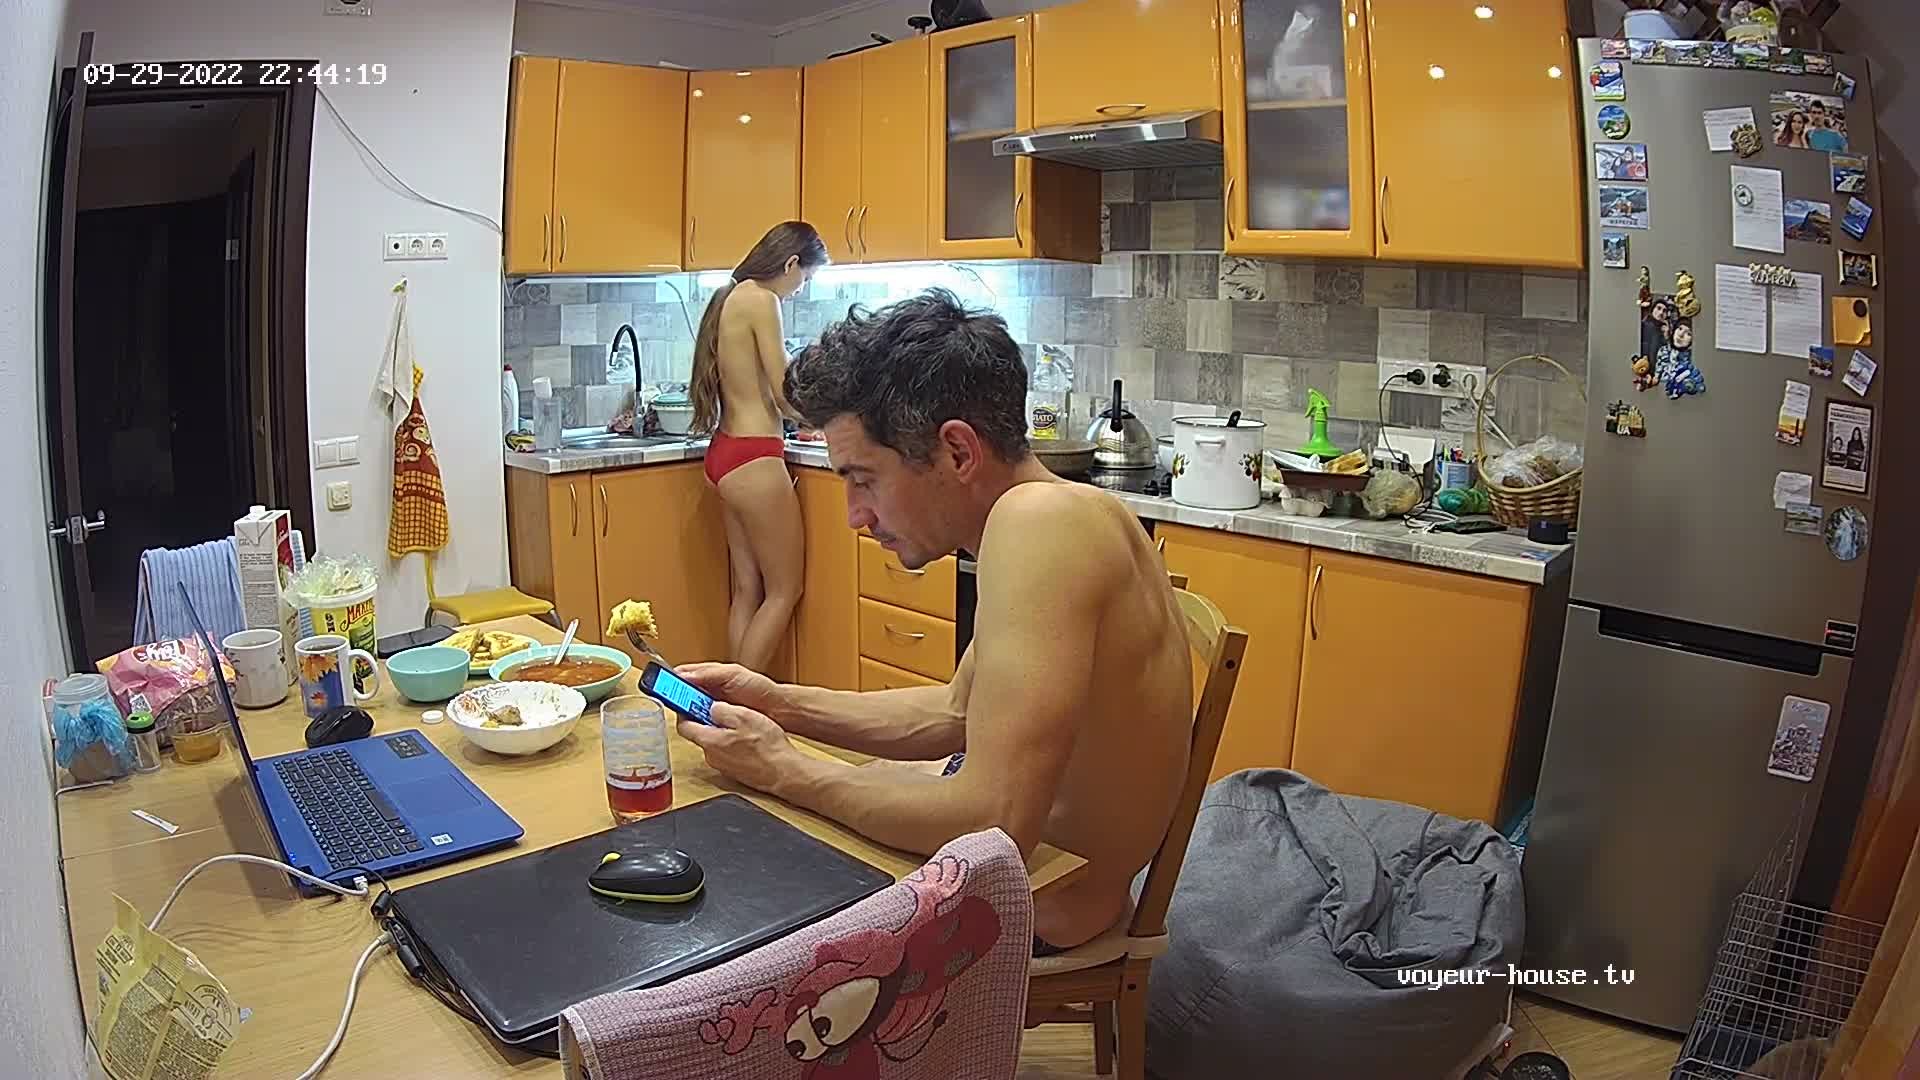 Ariela - Topless cooking | 2022-0929